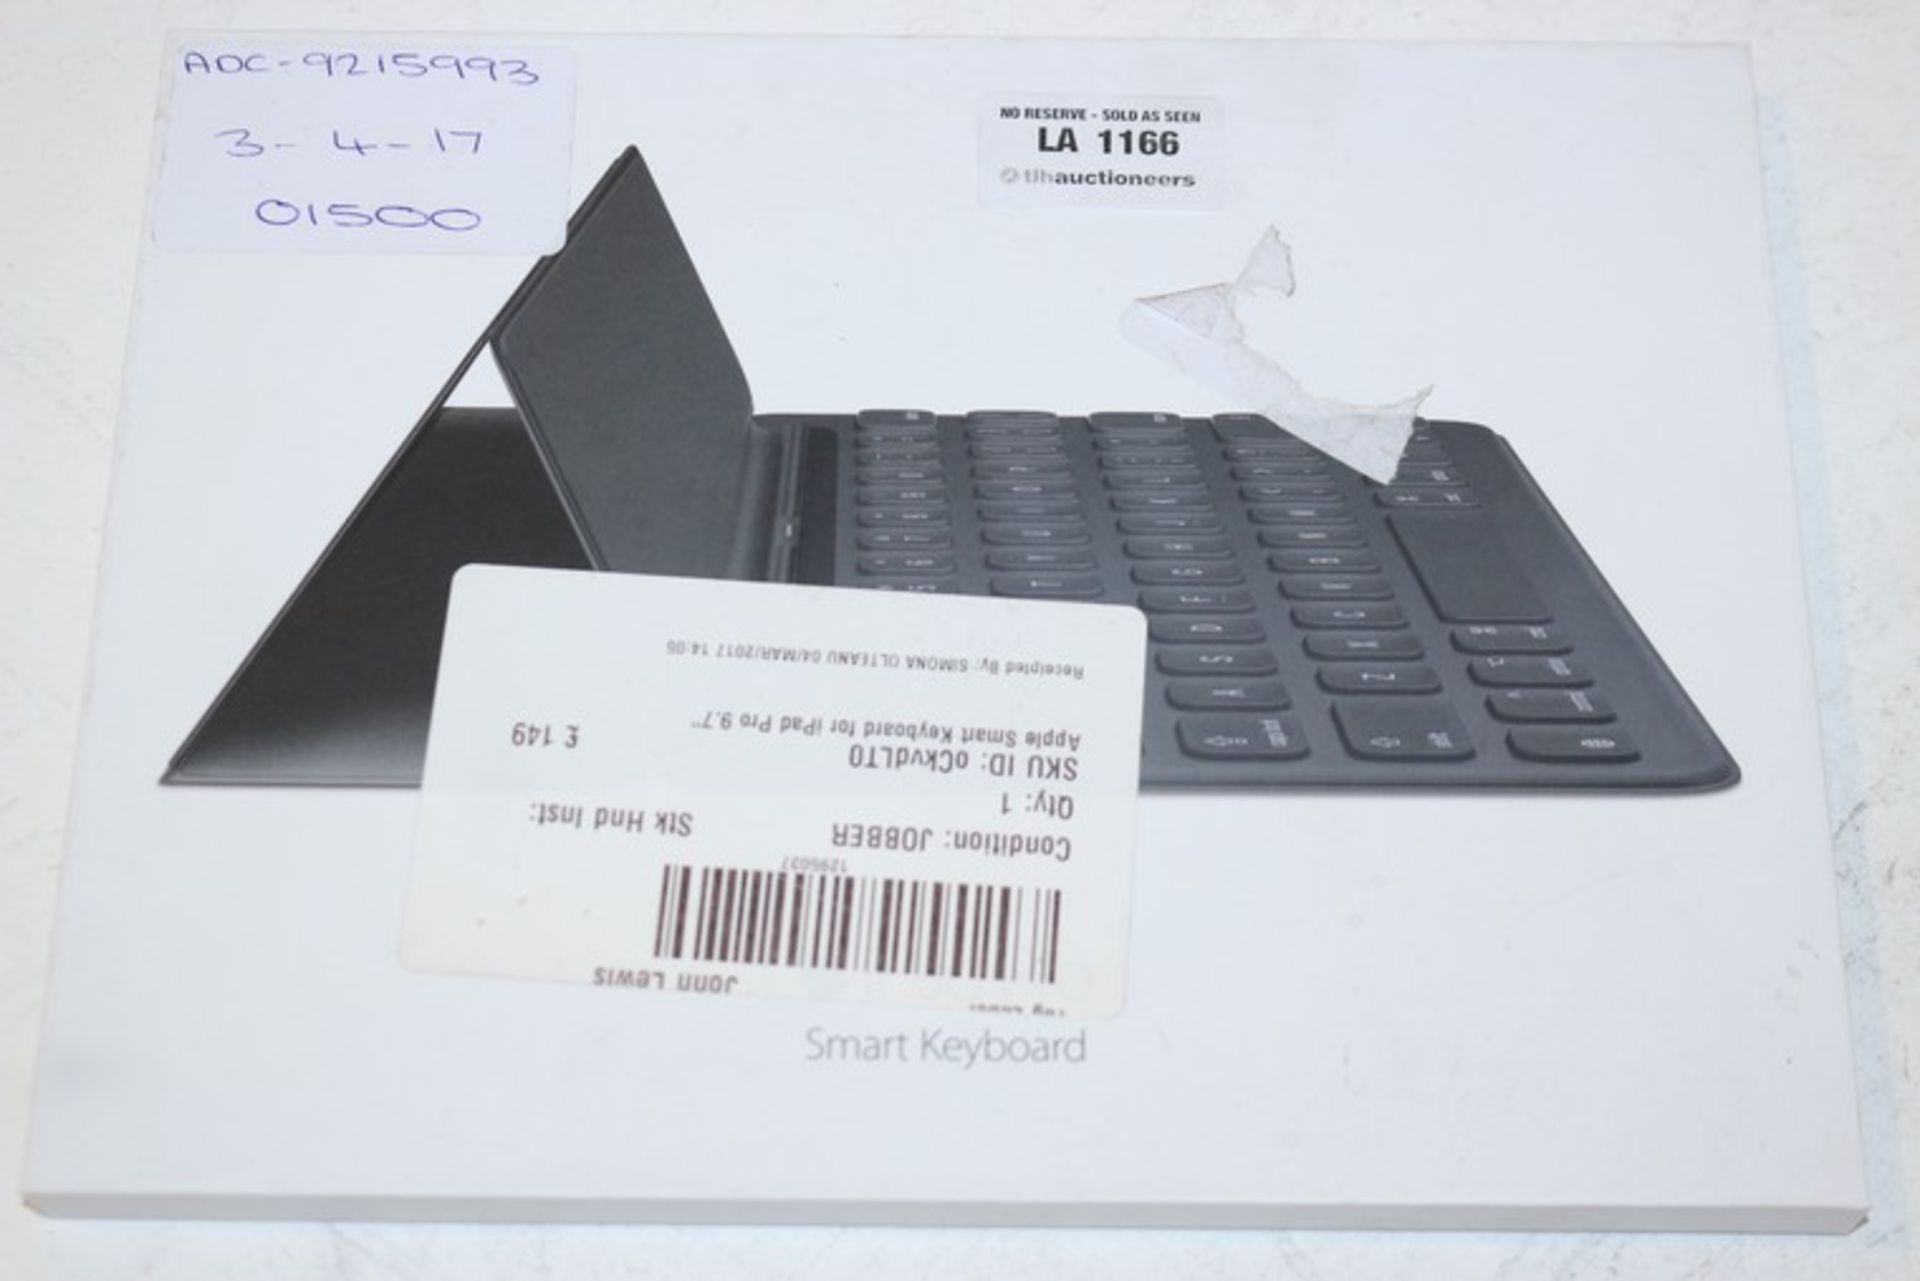 1 x BOXED APPLE PRO SMART KEYBOARD FOR IPAD RRP £150 (03.04.17) *PLEASE NOTE THAT THE BID PRICE IS